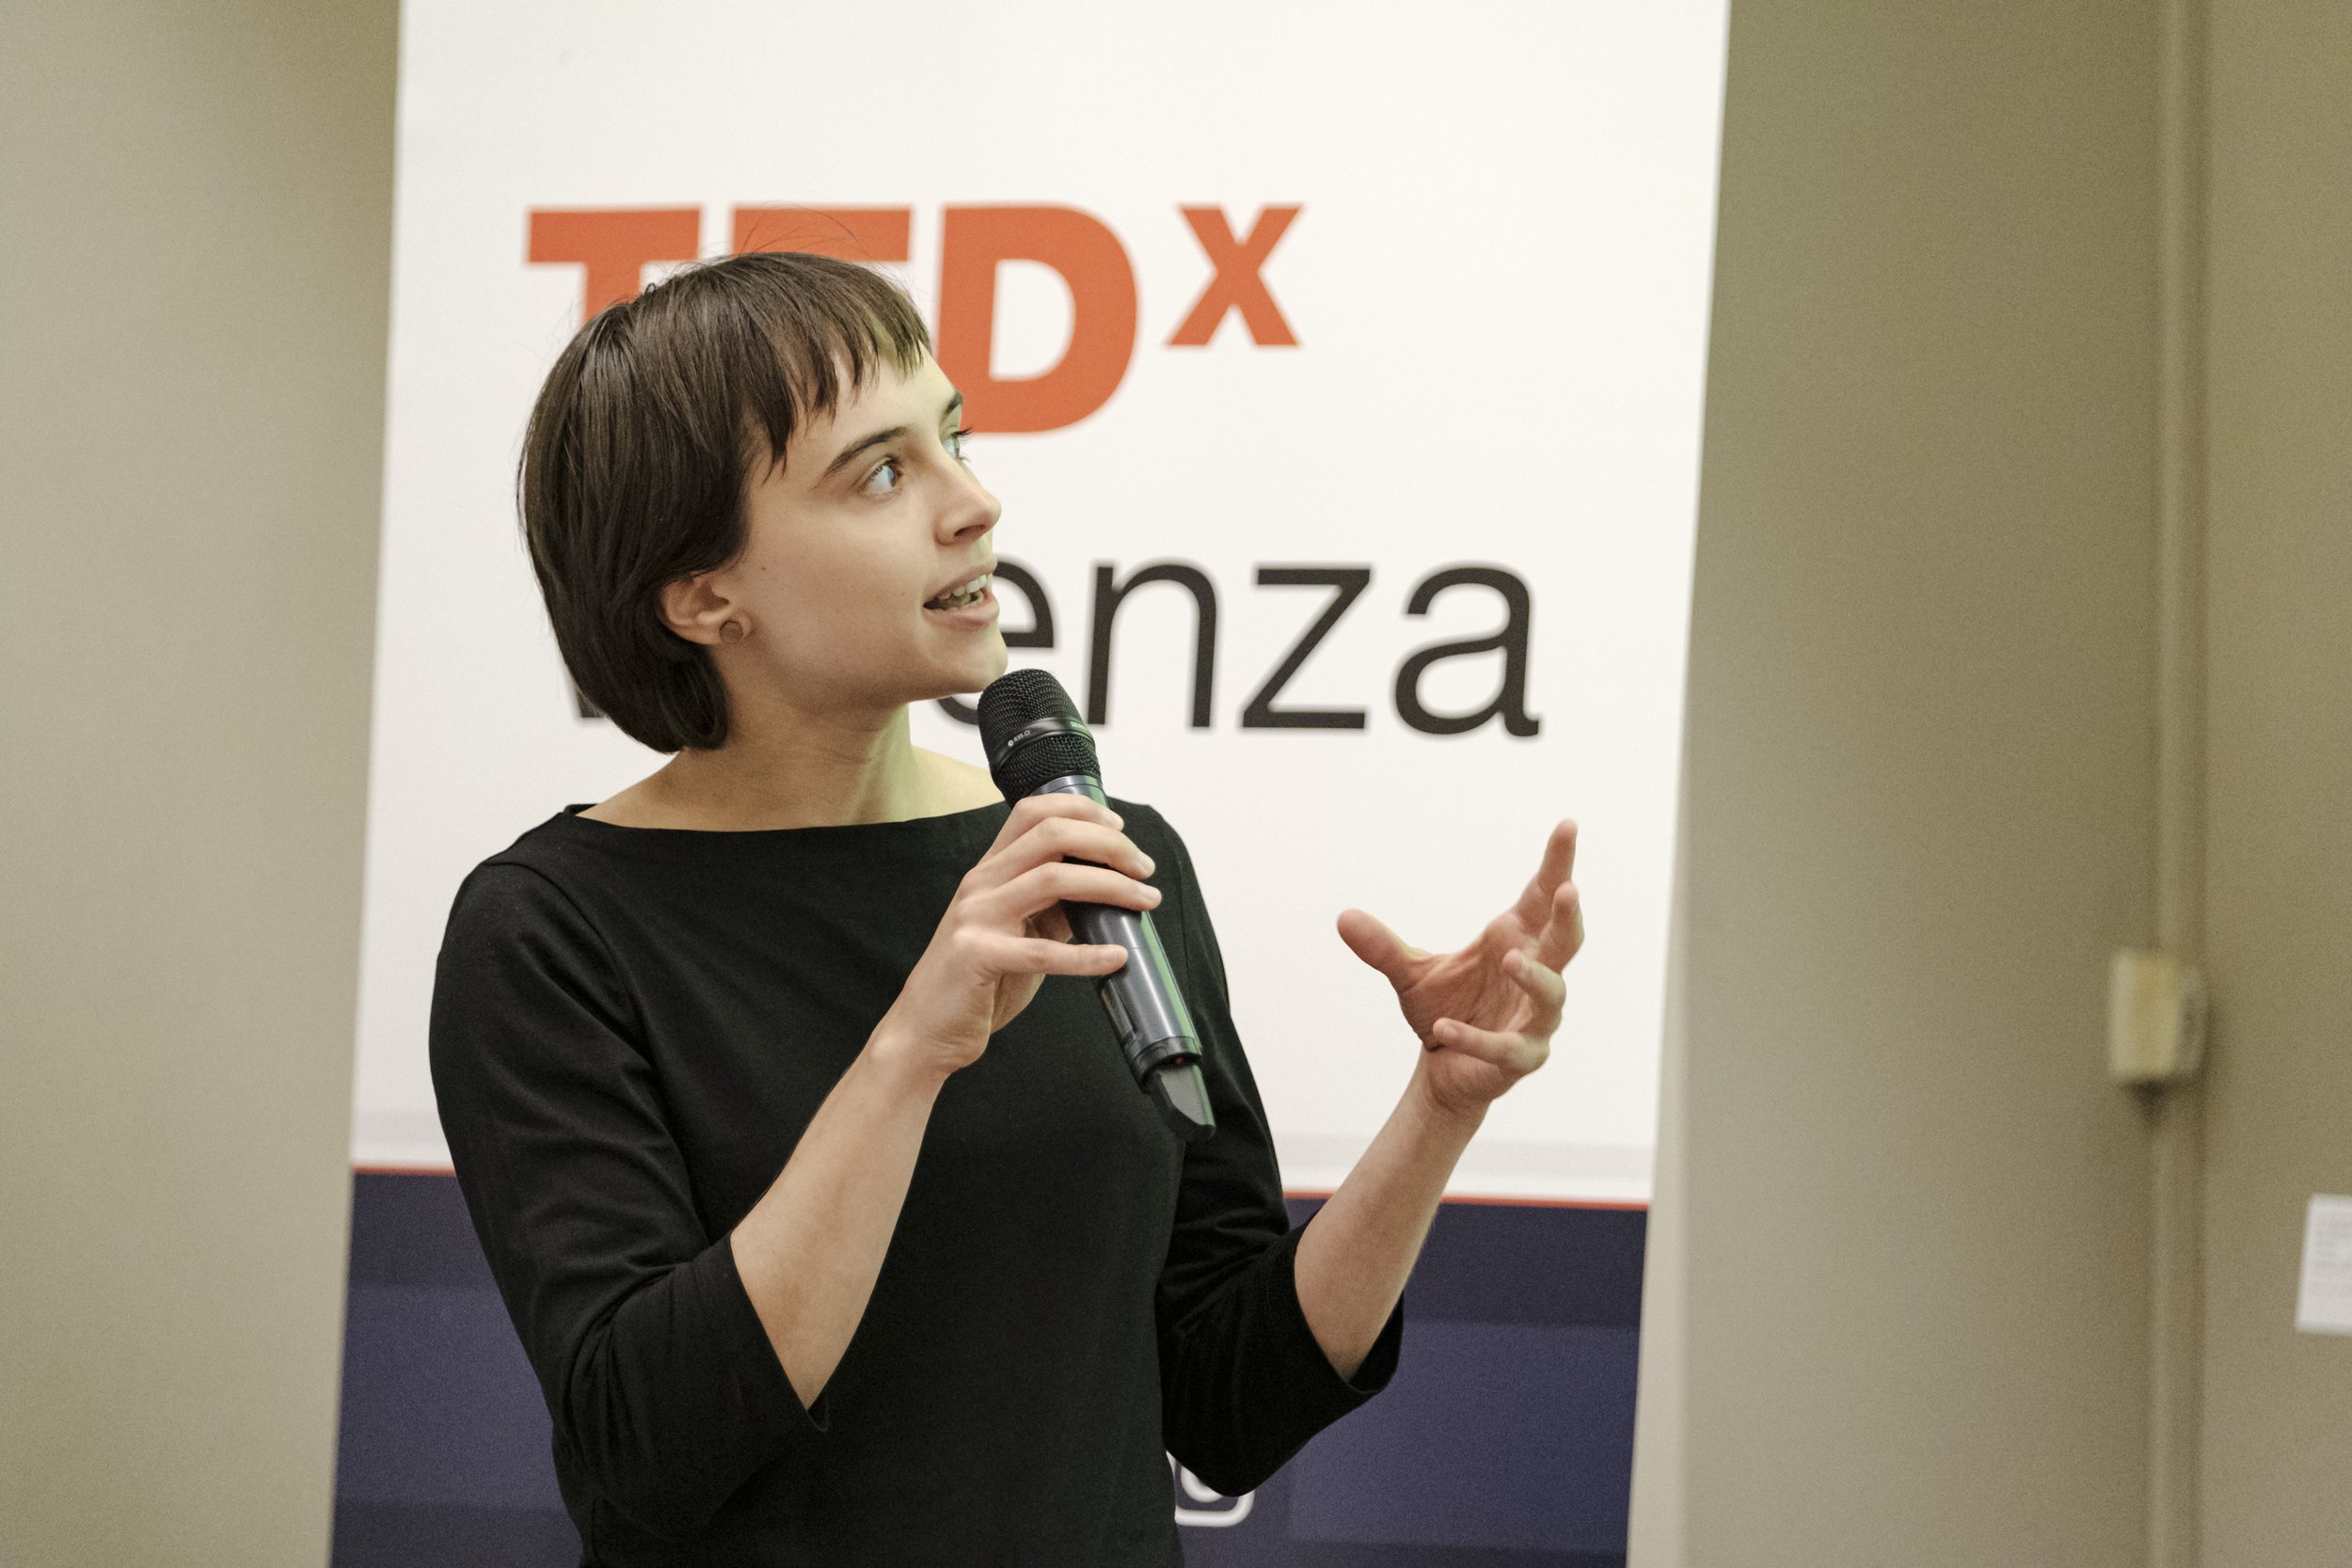 tedxvicenza--sprints-for-tedx-countdown_53332140058_o.jpg